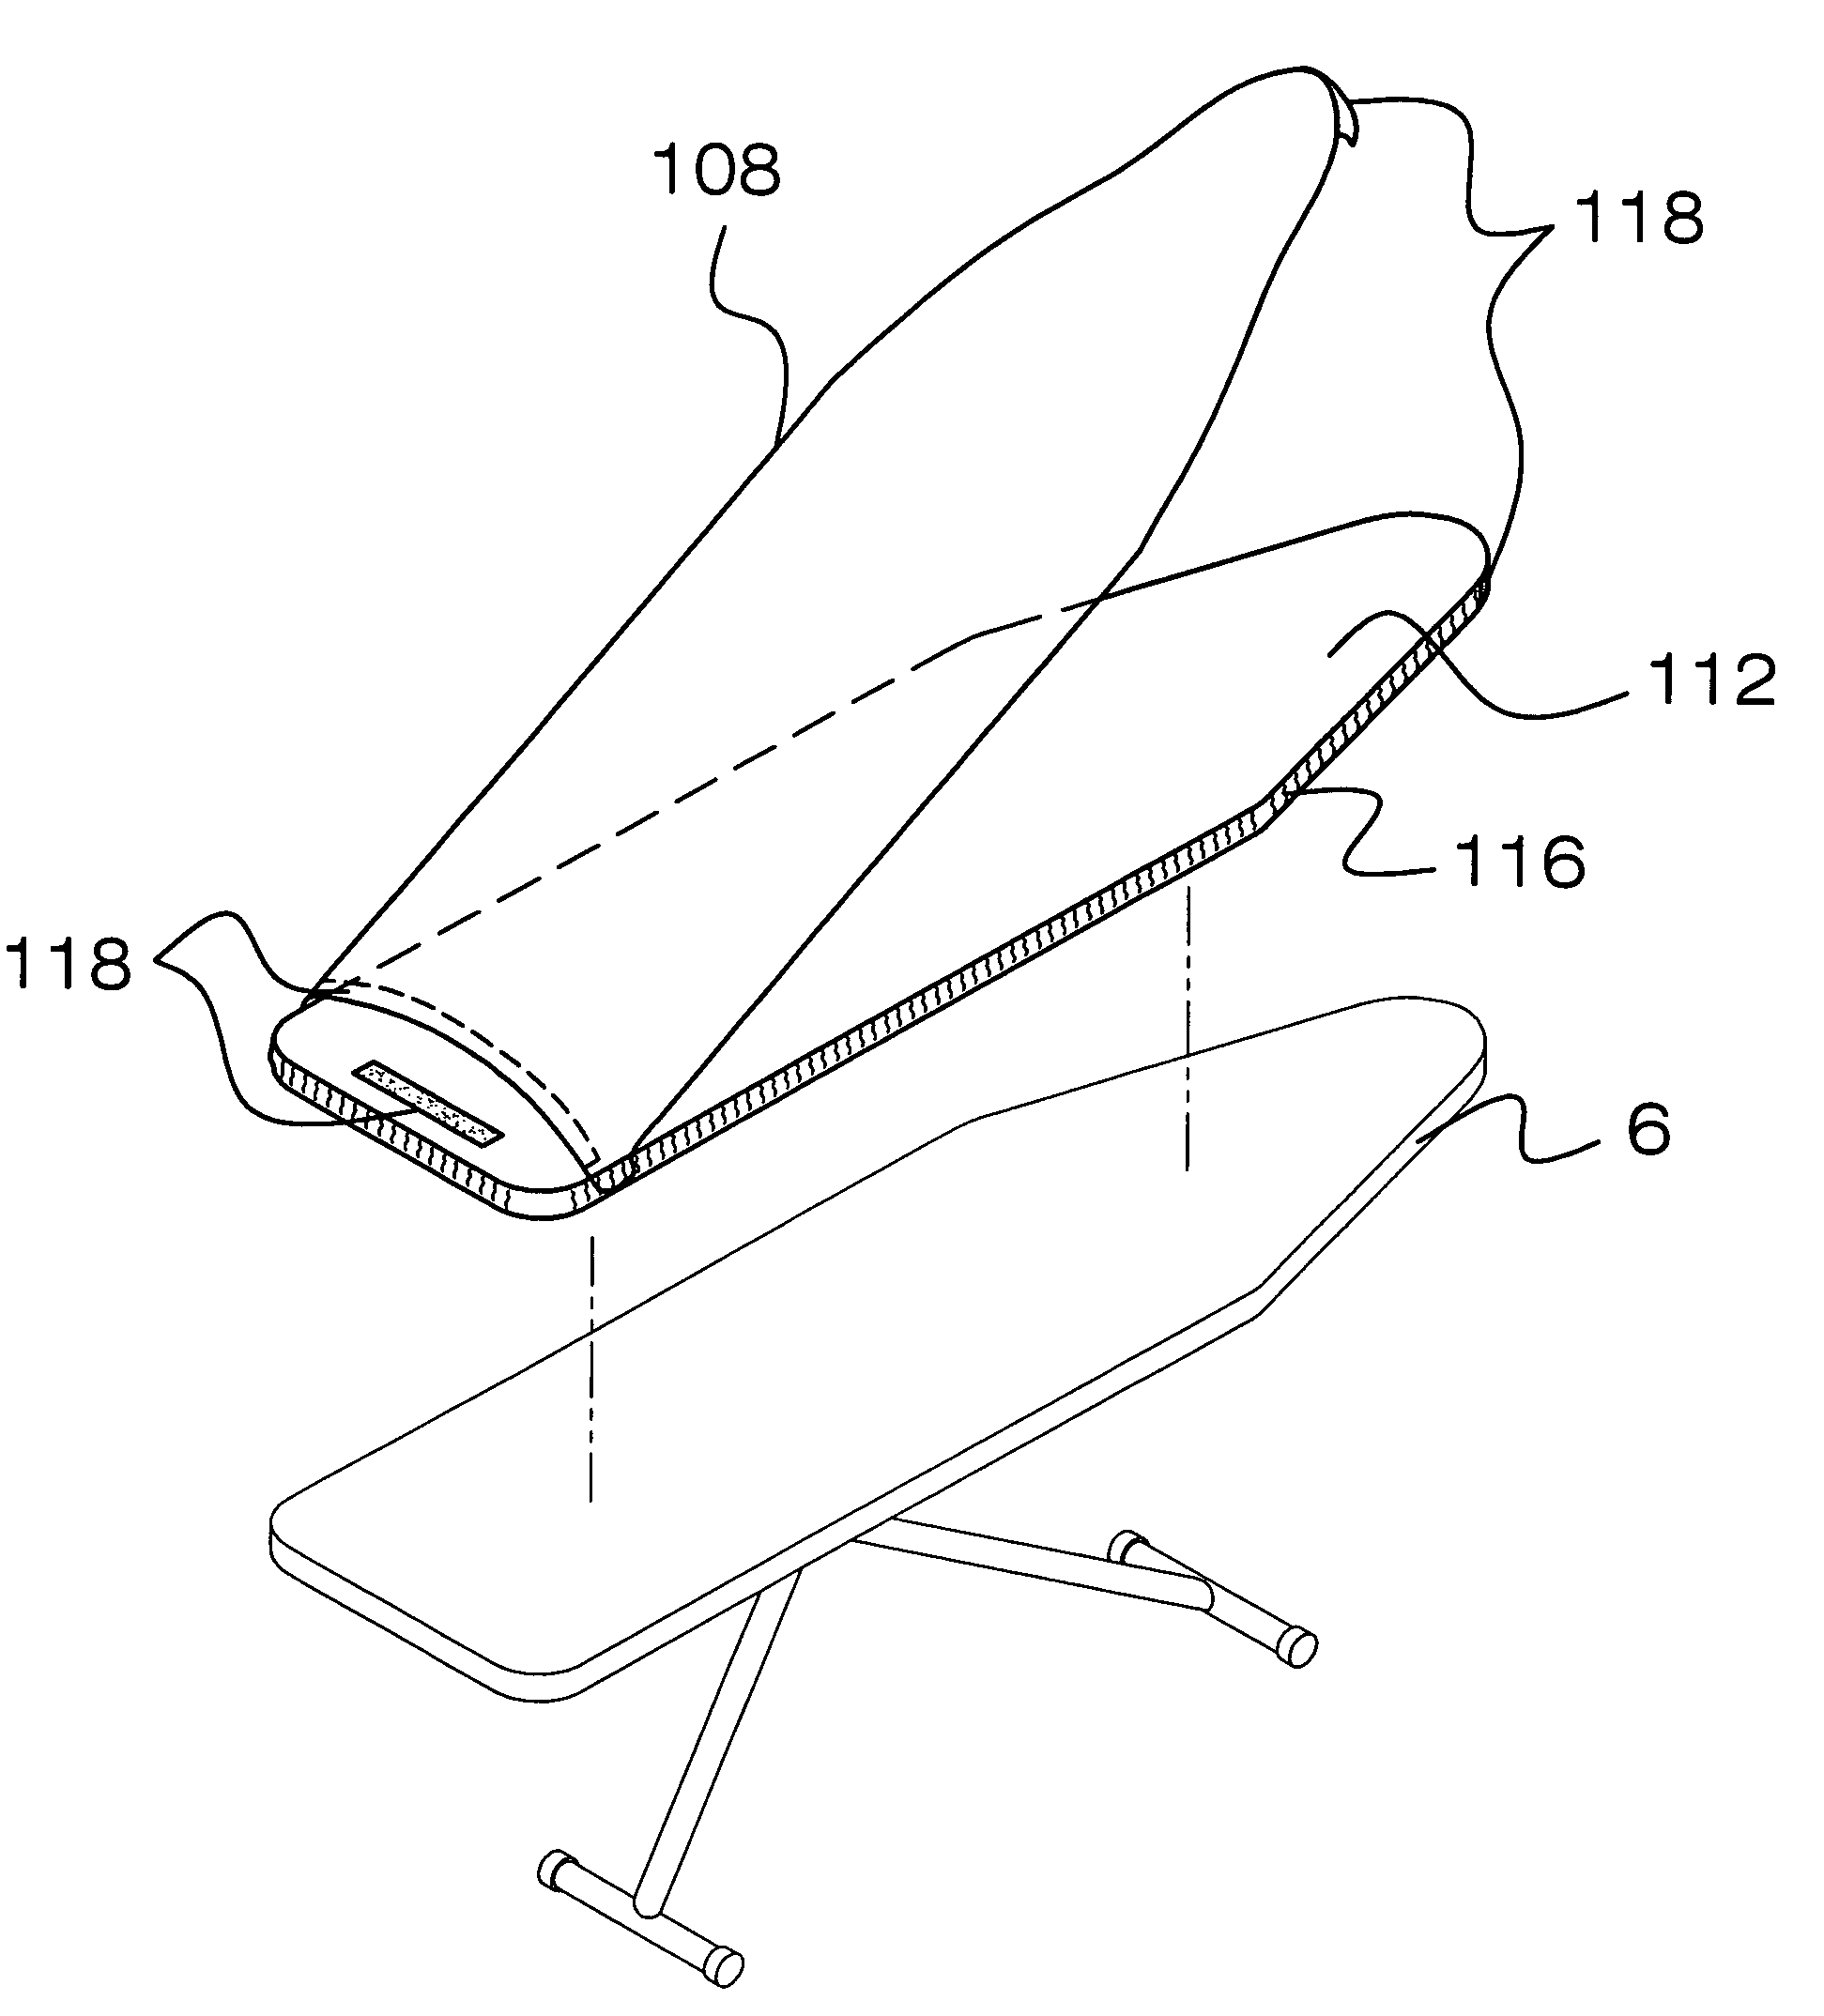 Apparatus for pre-starched ironing pads